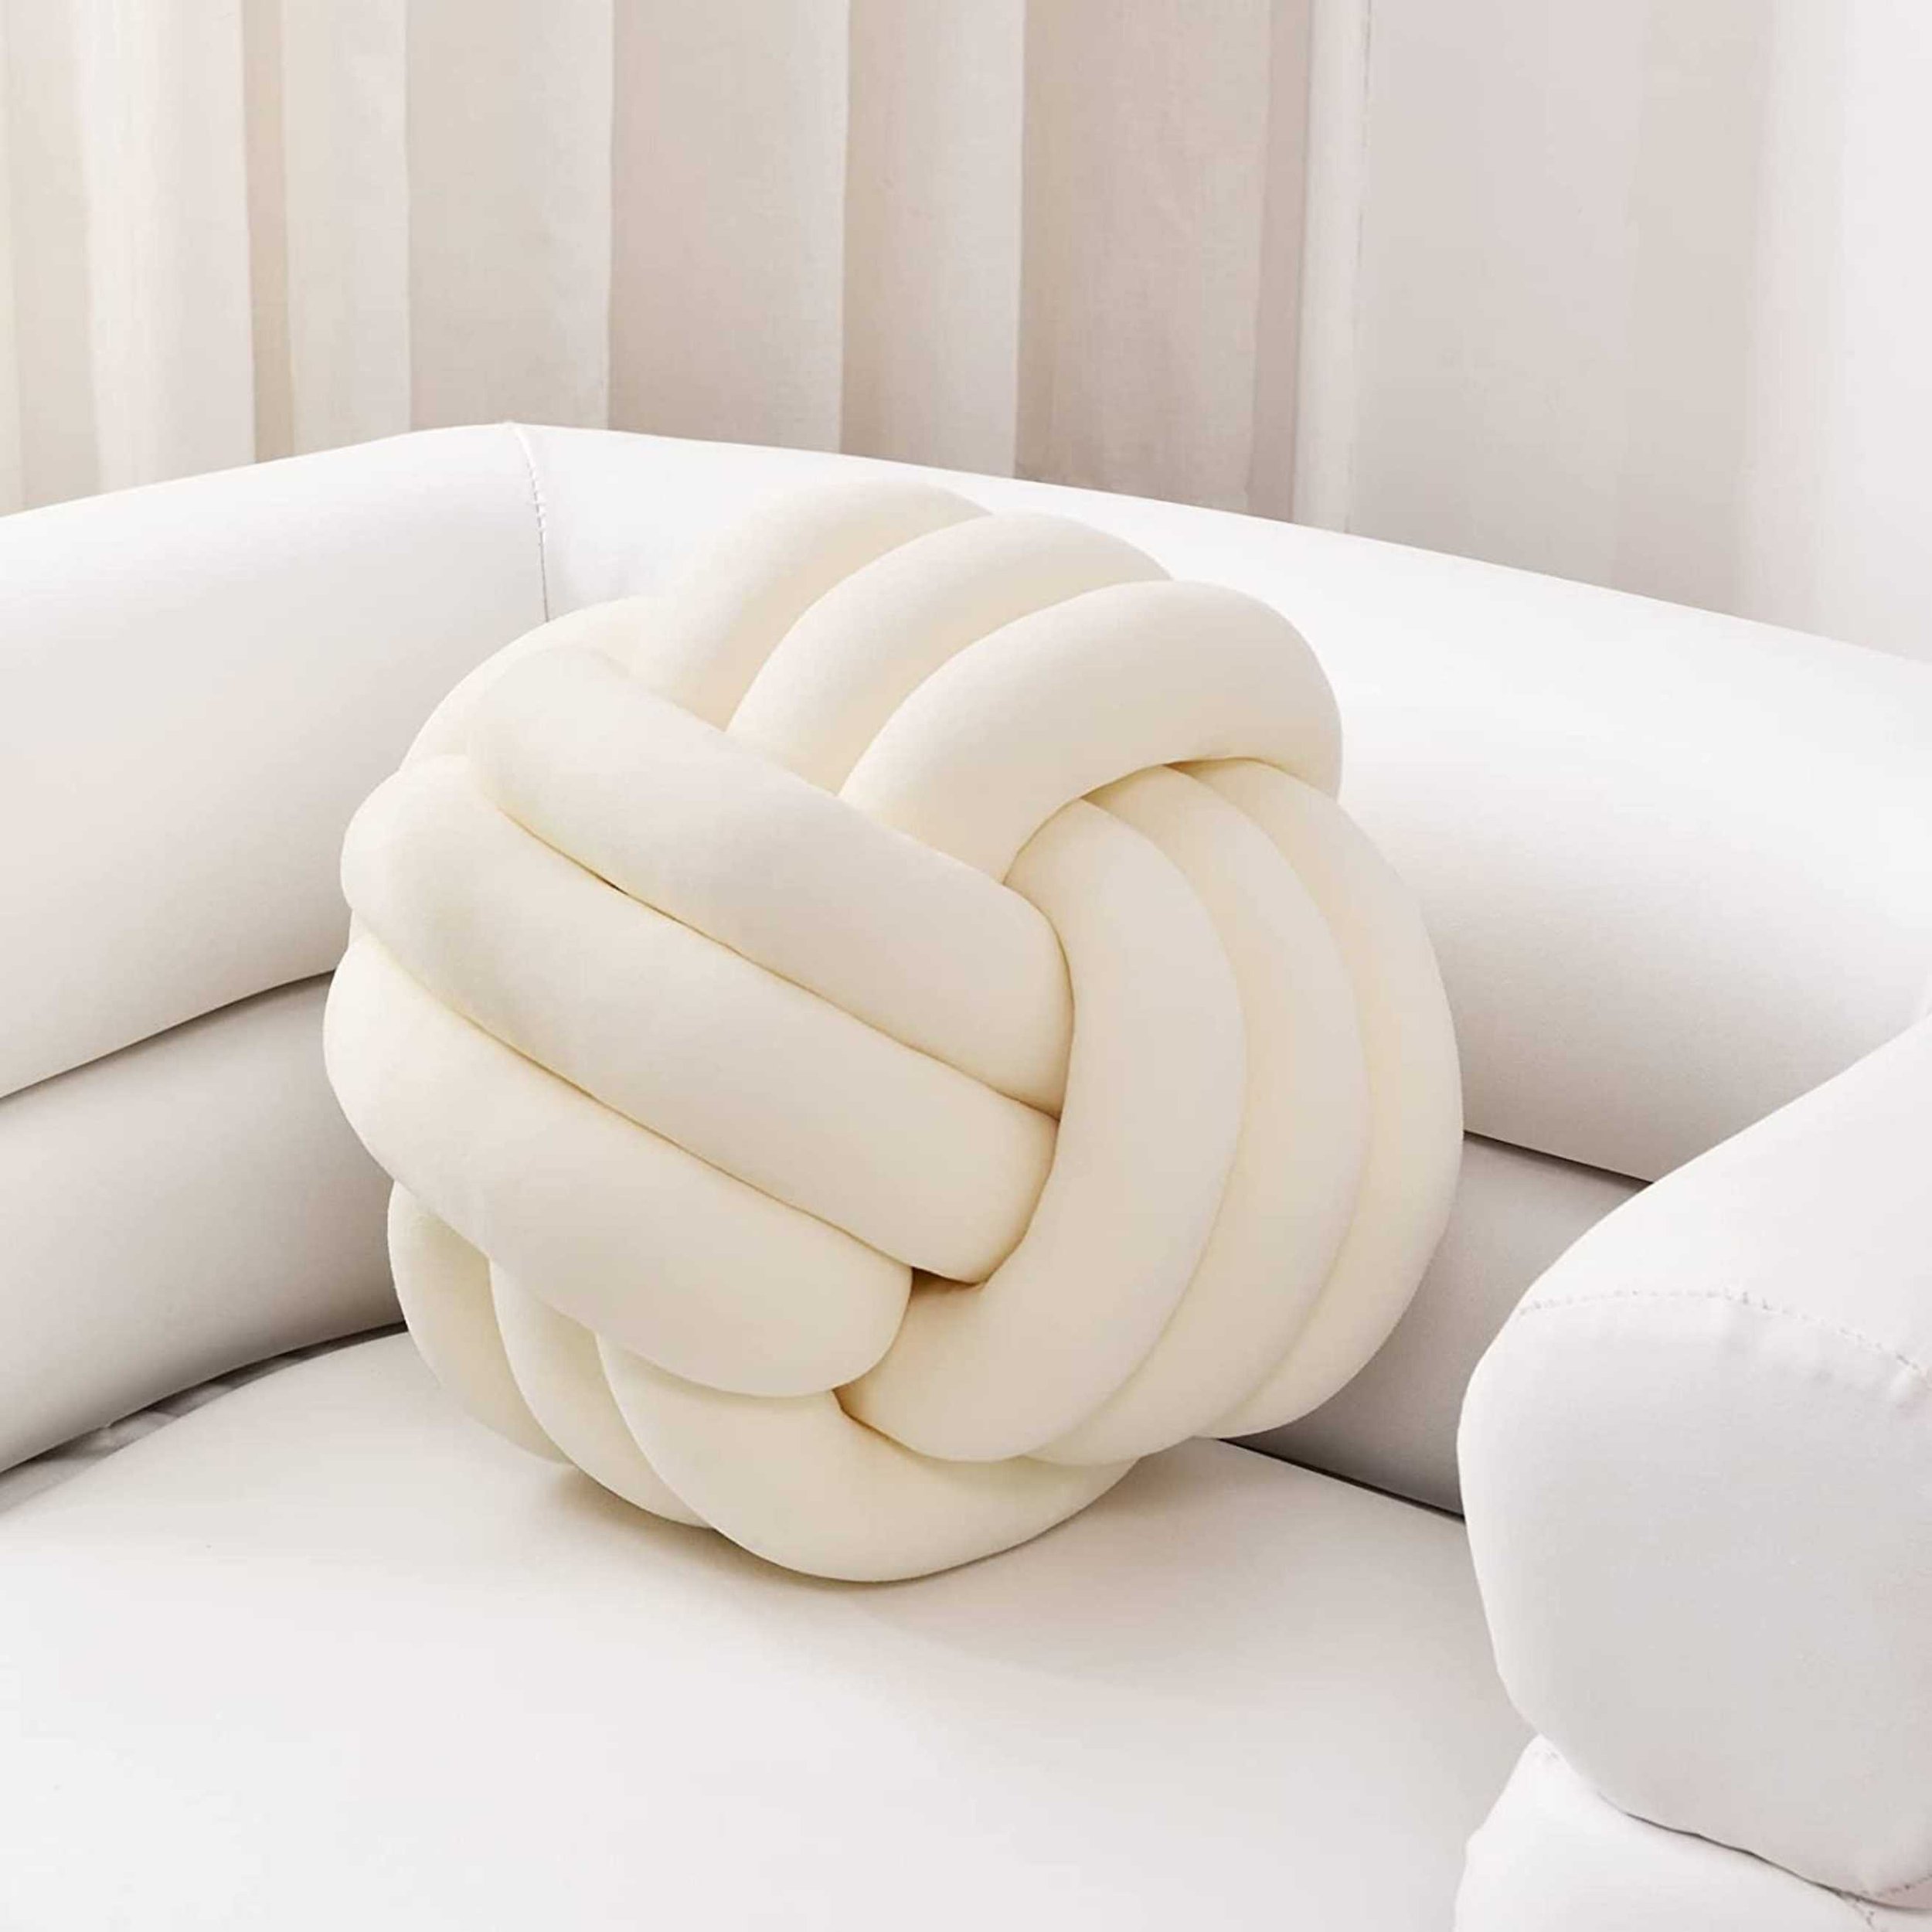 Knotted Throw Pillow.jpg